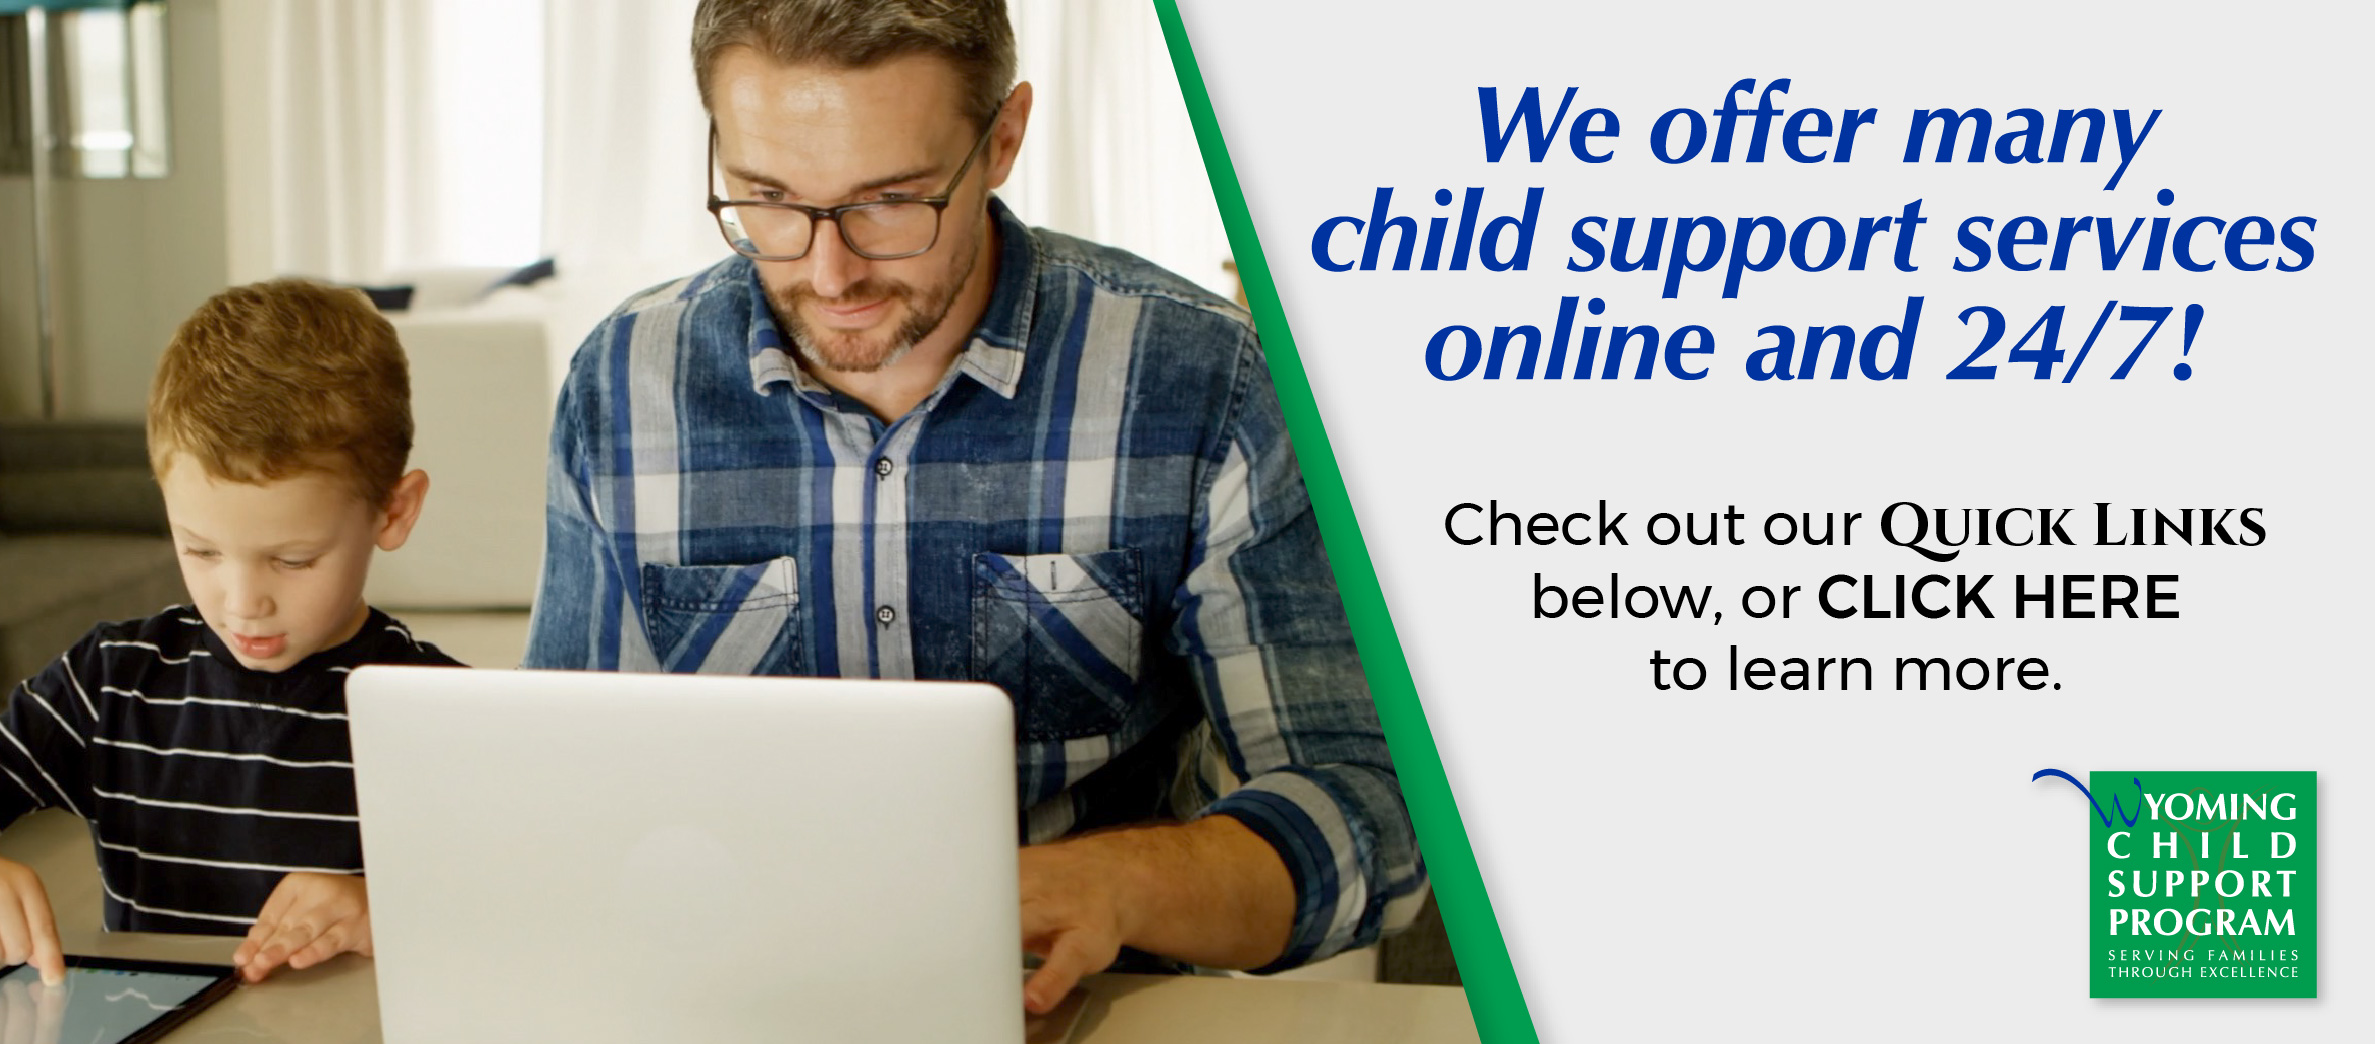 Wyoming Child Support Program online service 24 hours a day, 7 days a week